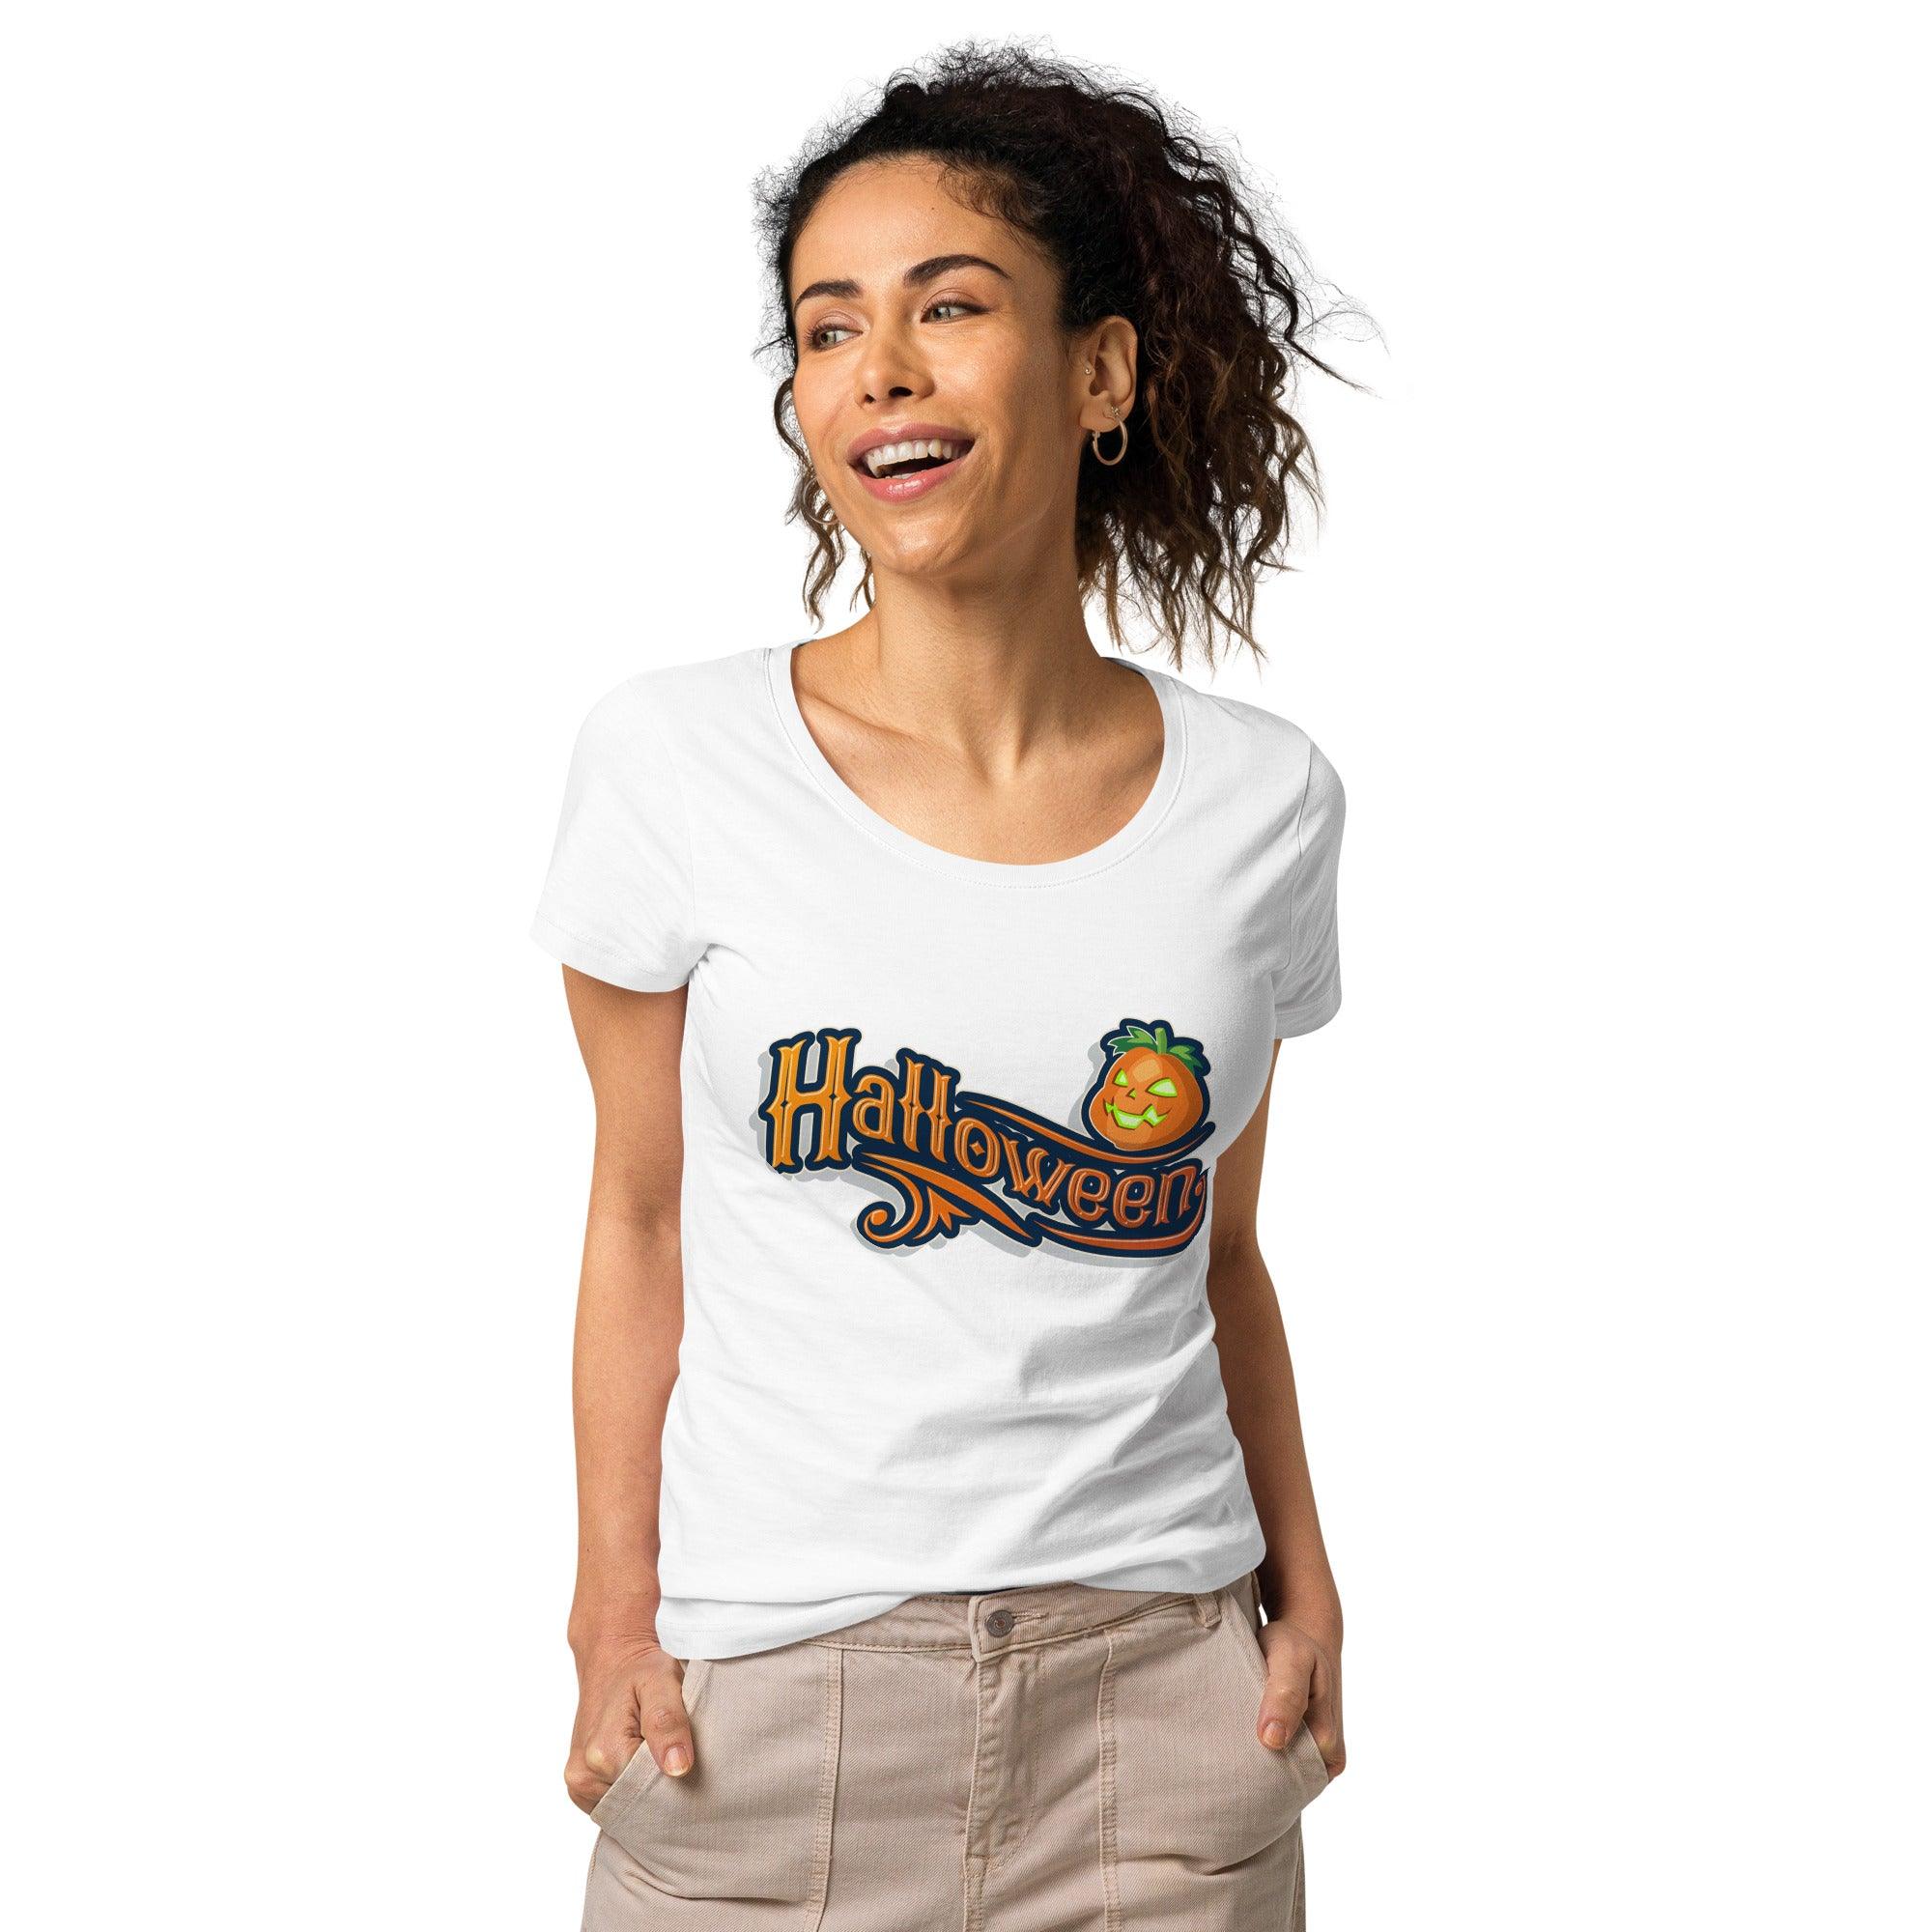 Woman modeling the Ghoulishly Gorgeous Organic Halloween Tee, showcasing its stylish design and commitment to eco-friendly fashion.